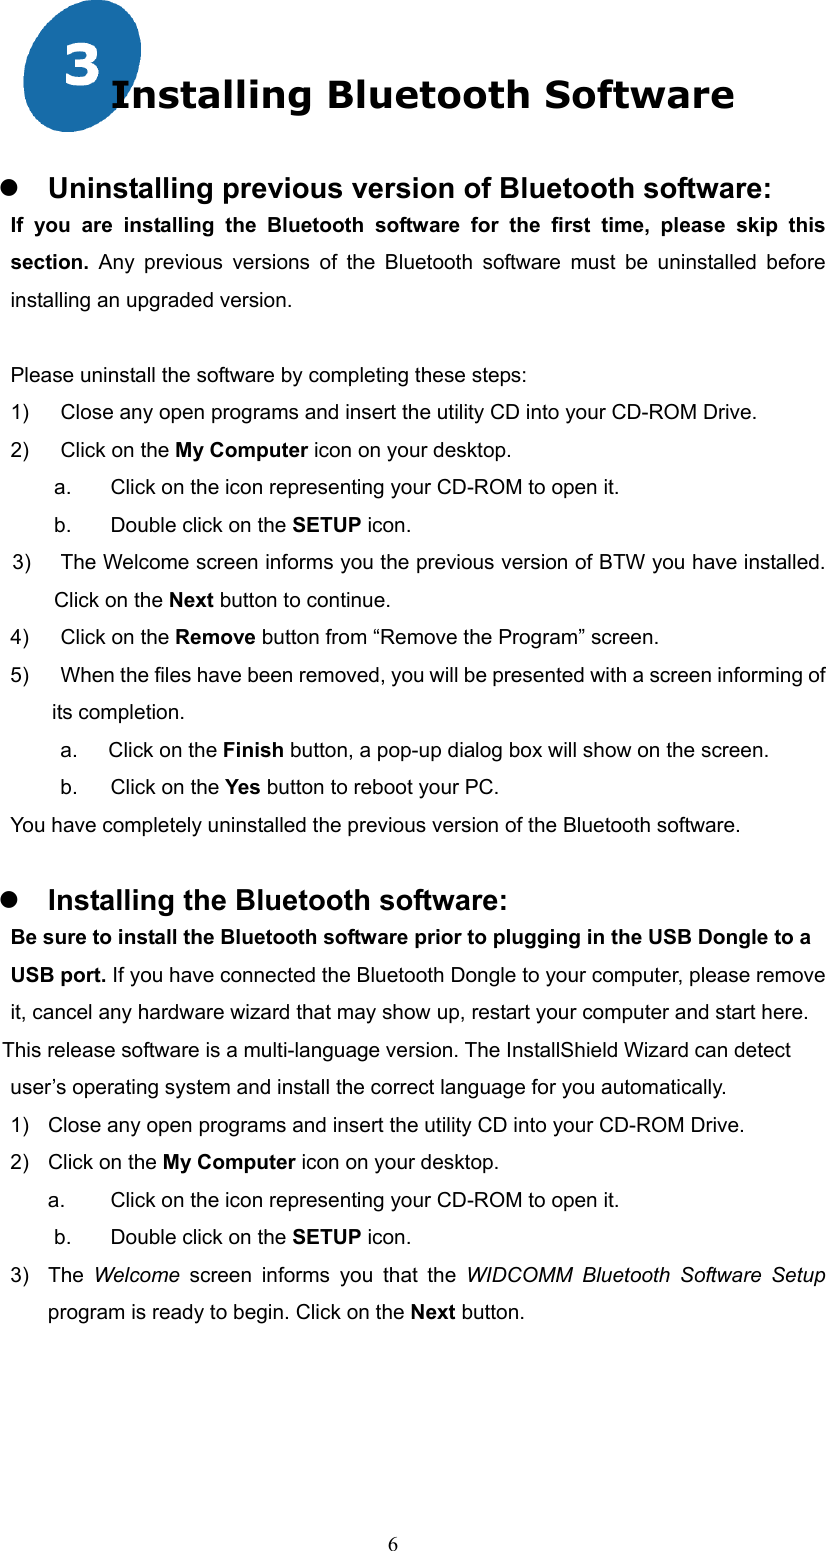  6 Installing Bluetooth Software   Uninstalling previous version of Bluetooth software: If you are installing the Bluetooth software for the first time, please skip this section.  Any previous versions of the Bluetooth software must be uninstalled before installing an upgraded version.  Please uninstall the software by completing these steps: 1)  Close any open programs and insert the utility CD into your CD-ROM Drive. 2)  Click on the My Computer icon on your desktop.   a.  Click on the icon representing your CD-ROM to open it. b.  Double click on the SETUP icon. 3)   The Welcome screen informs you the previous version of BTW you have installed. Click on the Next button to continue. 4)  Click on the Remove button from “Remove the Program” screen. 5)    When the files have been removed, you will be presented with a screen informing of its completion. a.    Click on the Finish button, a pop-up dialog box will show on the screen. b.  Click on the Yes button to reboot your PC. You have completely uninstalled the previous version of the Bluetooth software.   Installing the Bluetooth software:     Be sure to install the Bluetooth software prior to plugging in the USB Dongle to a   USB port. If you have connected the Bluetooth Dongle to your computer, please remove   it, cancel any hardware wizard that may show up, restart your computer and start here. This release software is a multi-language version. The InstallShield Wizard can detect   user’s operating system and install the correct language for you automatically. 1)  Close any open programs and insert the utility CD into your CD-ROM Drive. 2)  Click on the My Computer icon on your desktop.   a.  Click on the icon representing your CD-ROM to open it.   b.  Double click on the SETUP icon. 3) The Welcome screen informs you that the WIDCOMM Bluetooth Software Setup program is ready to begin. Click on the Next button.   